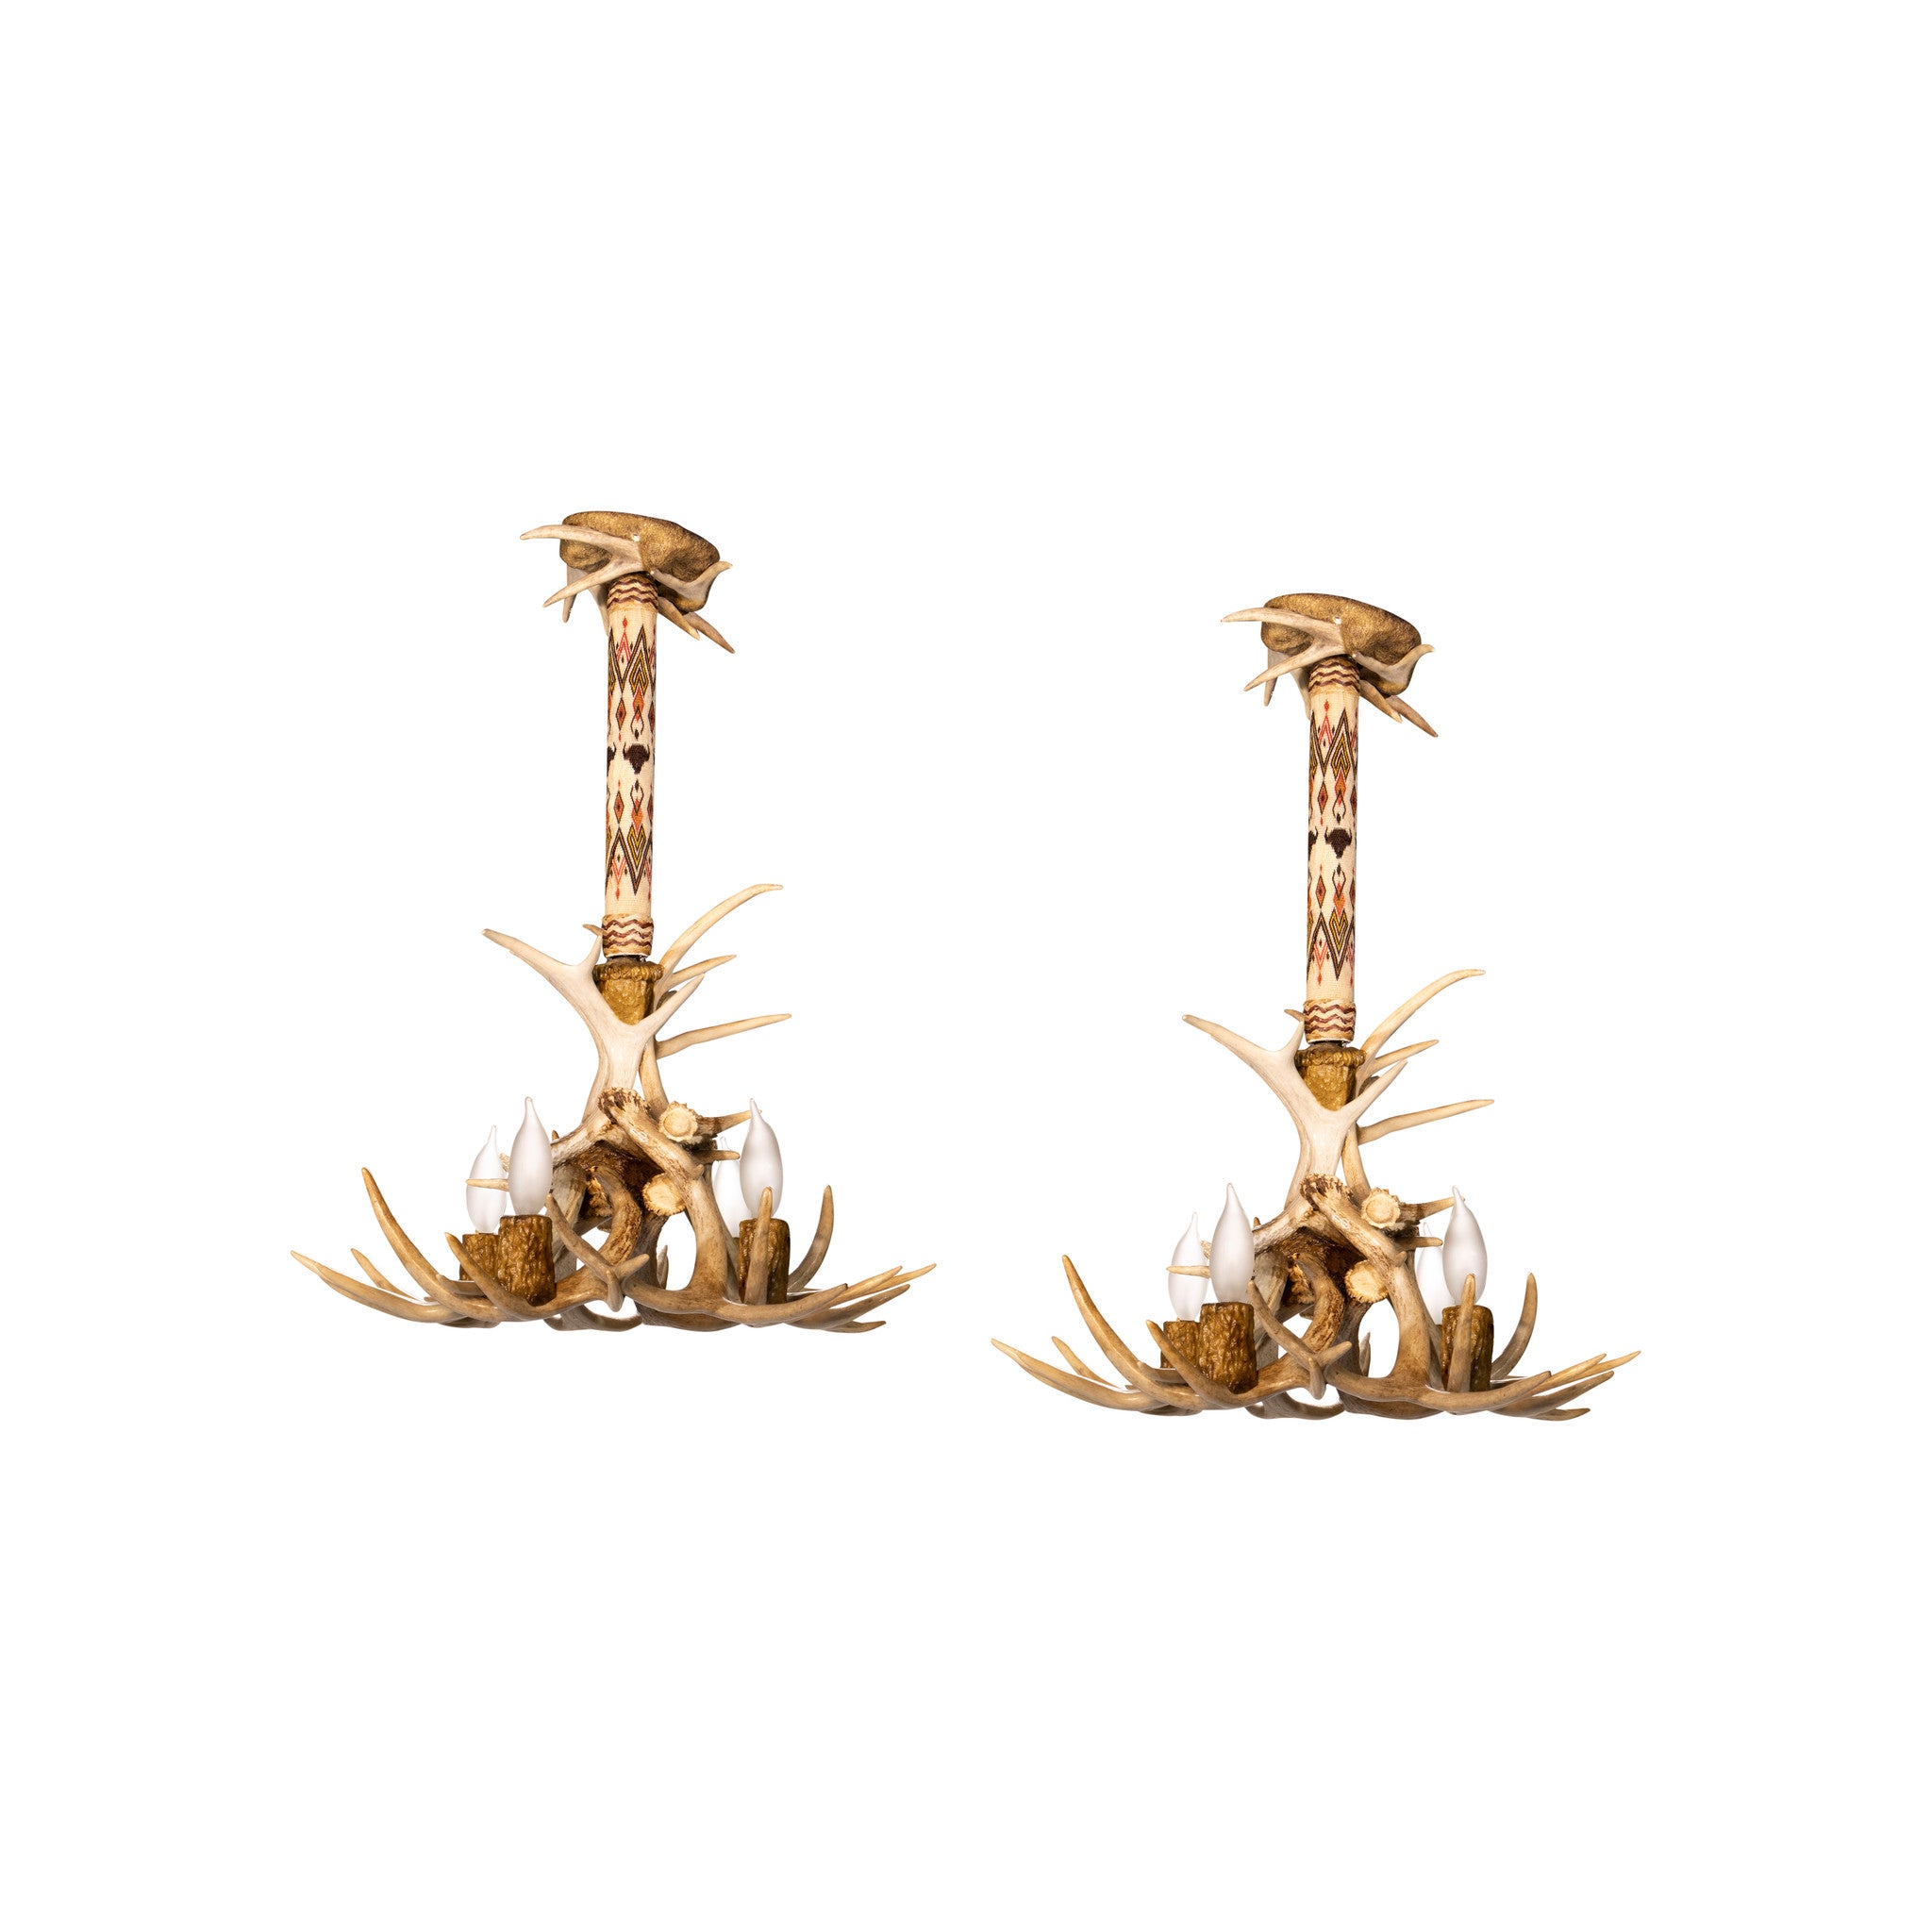 Pair of Antler Chandeilers with Horsehair Hitching, Furnishings, Lighting, Ceiling Light